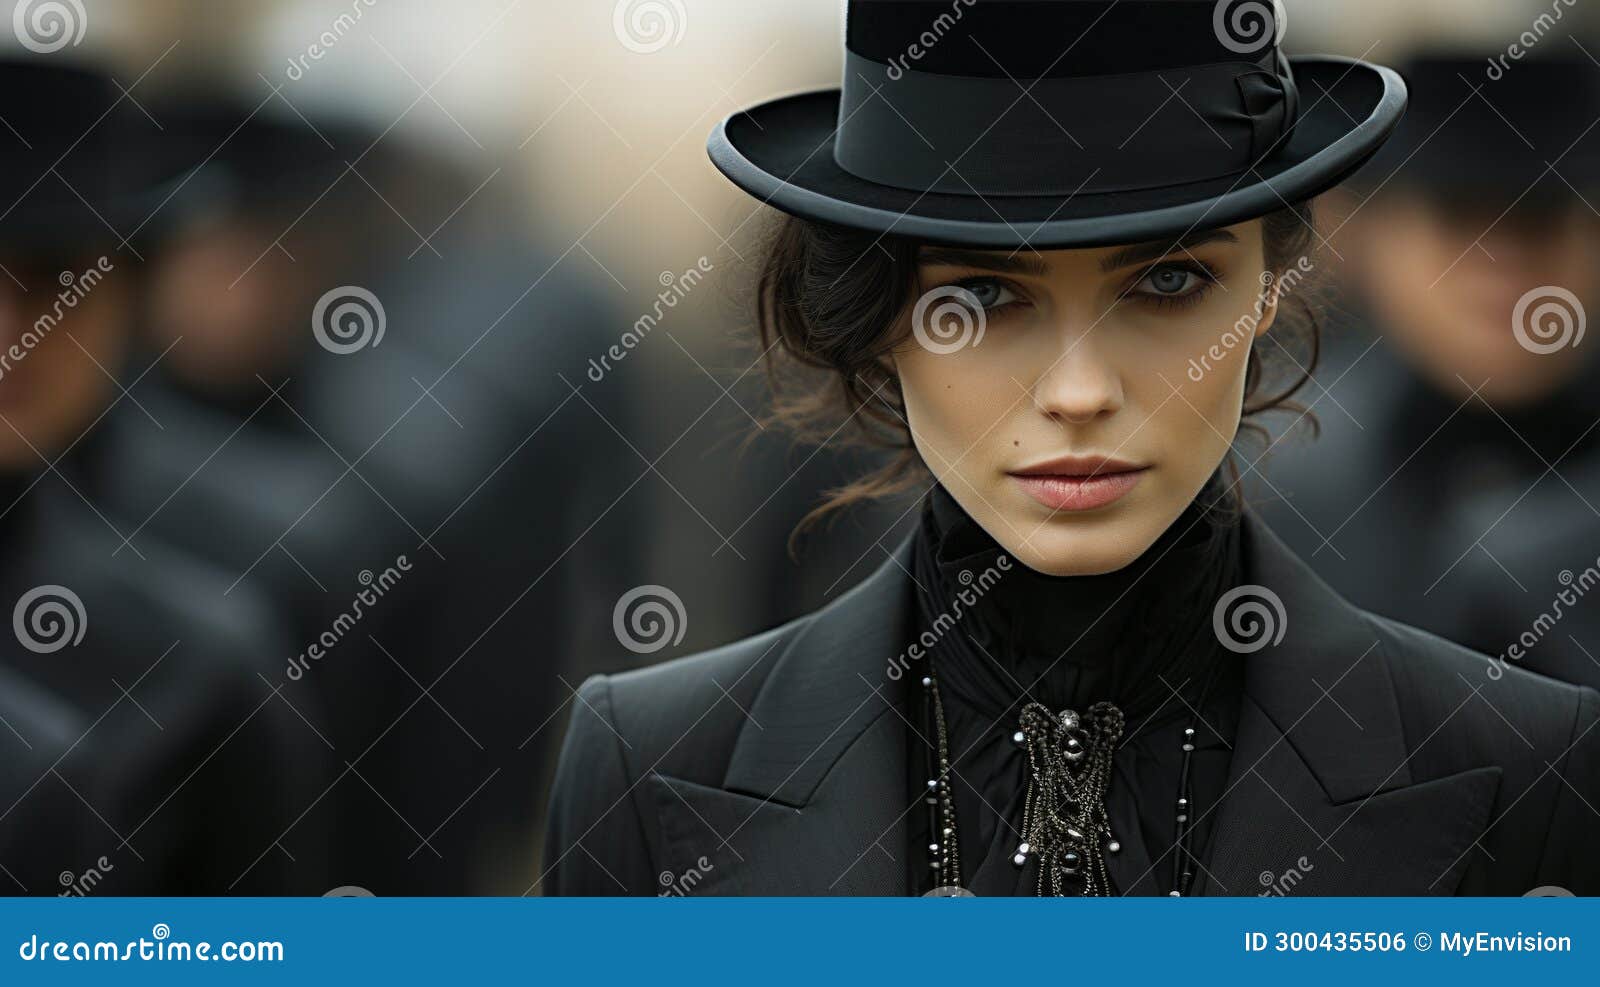 A Woman in a Black Suit and Hat Stock Illustration - Illustration of ...